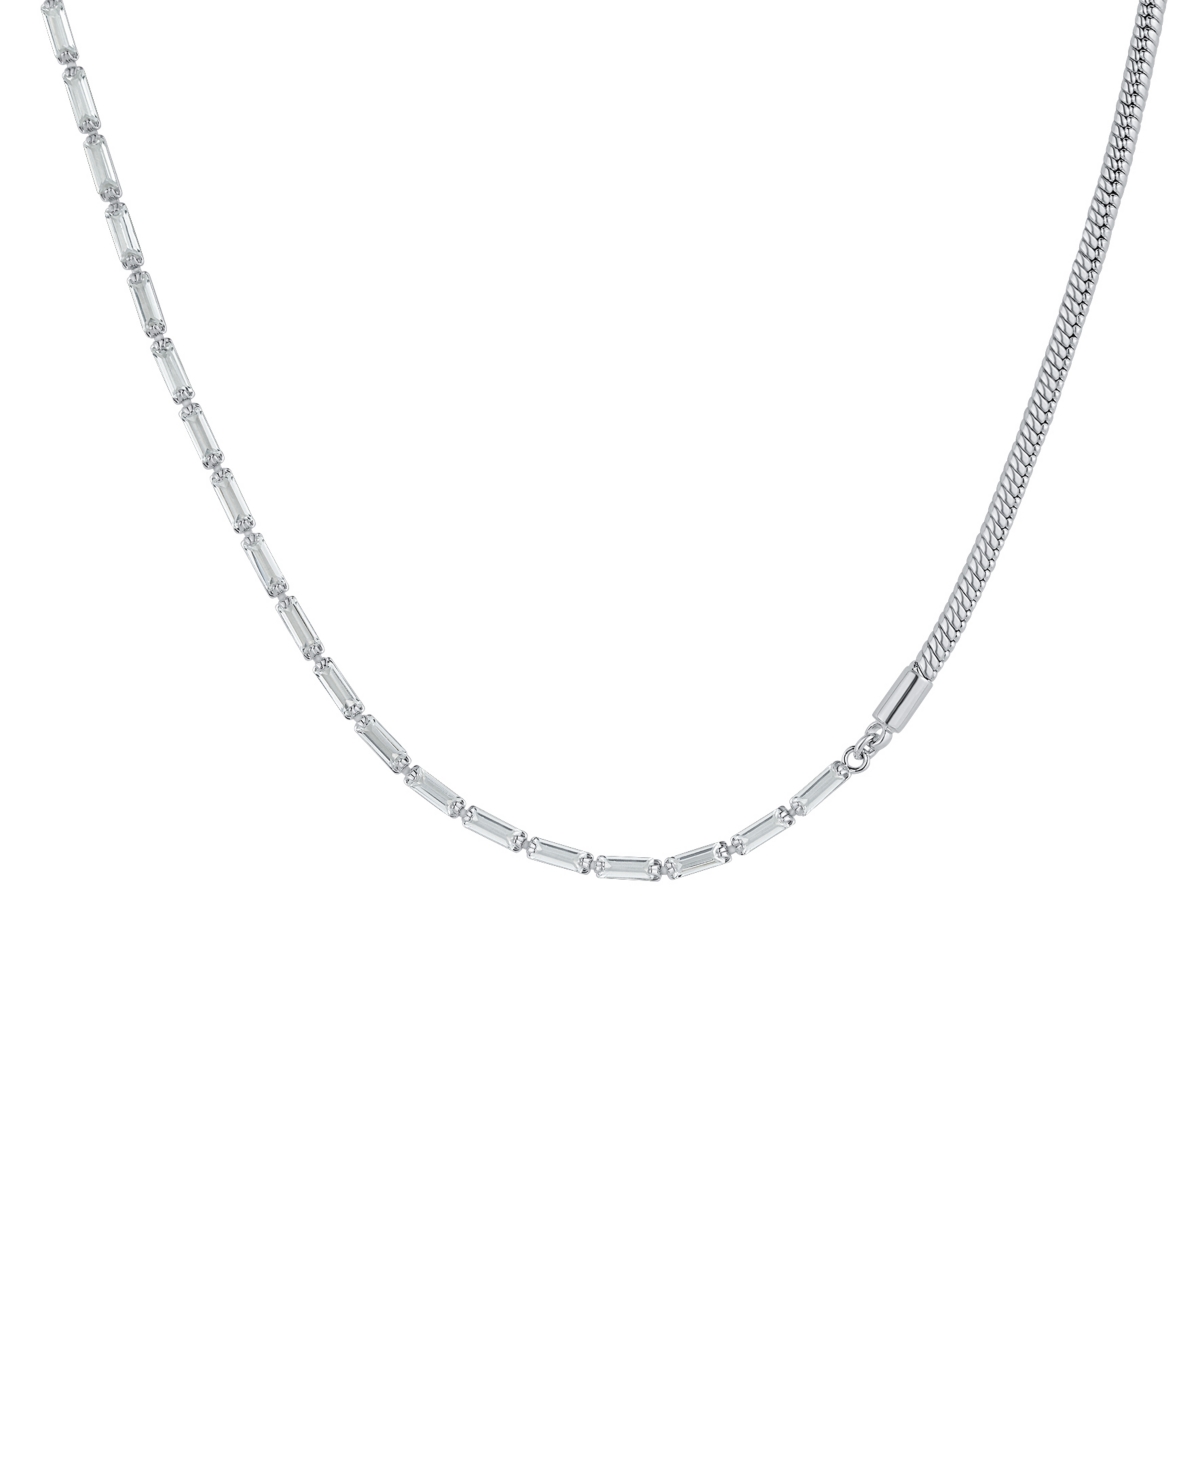 Cubic Zirconia Fine Silver-Plated Snake Chain Necklace - Silver